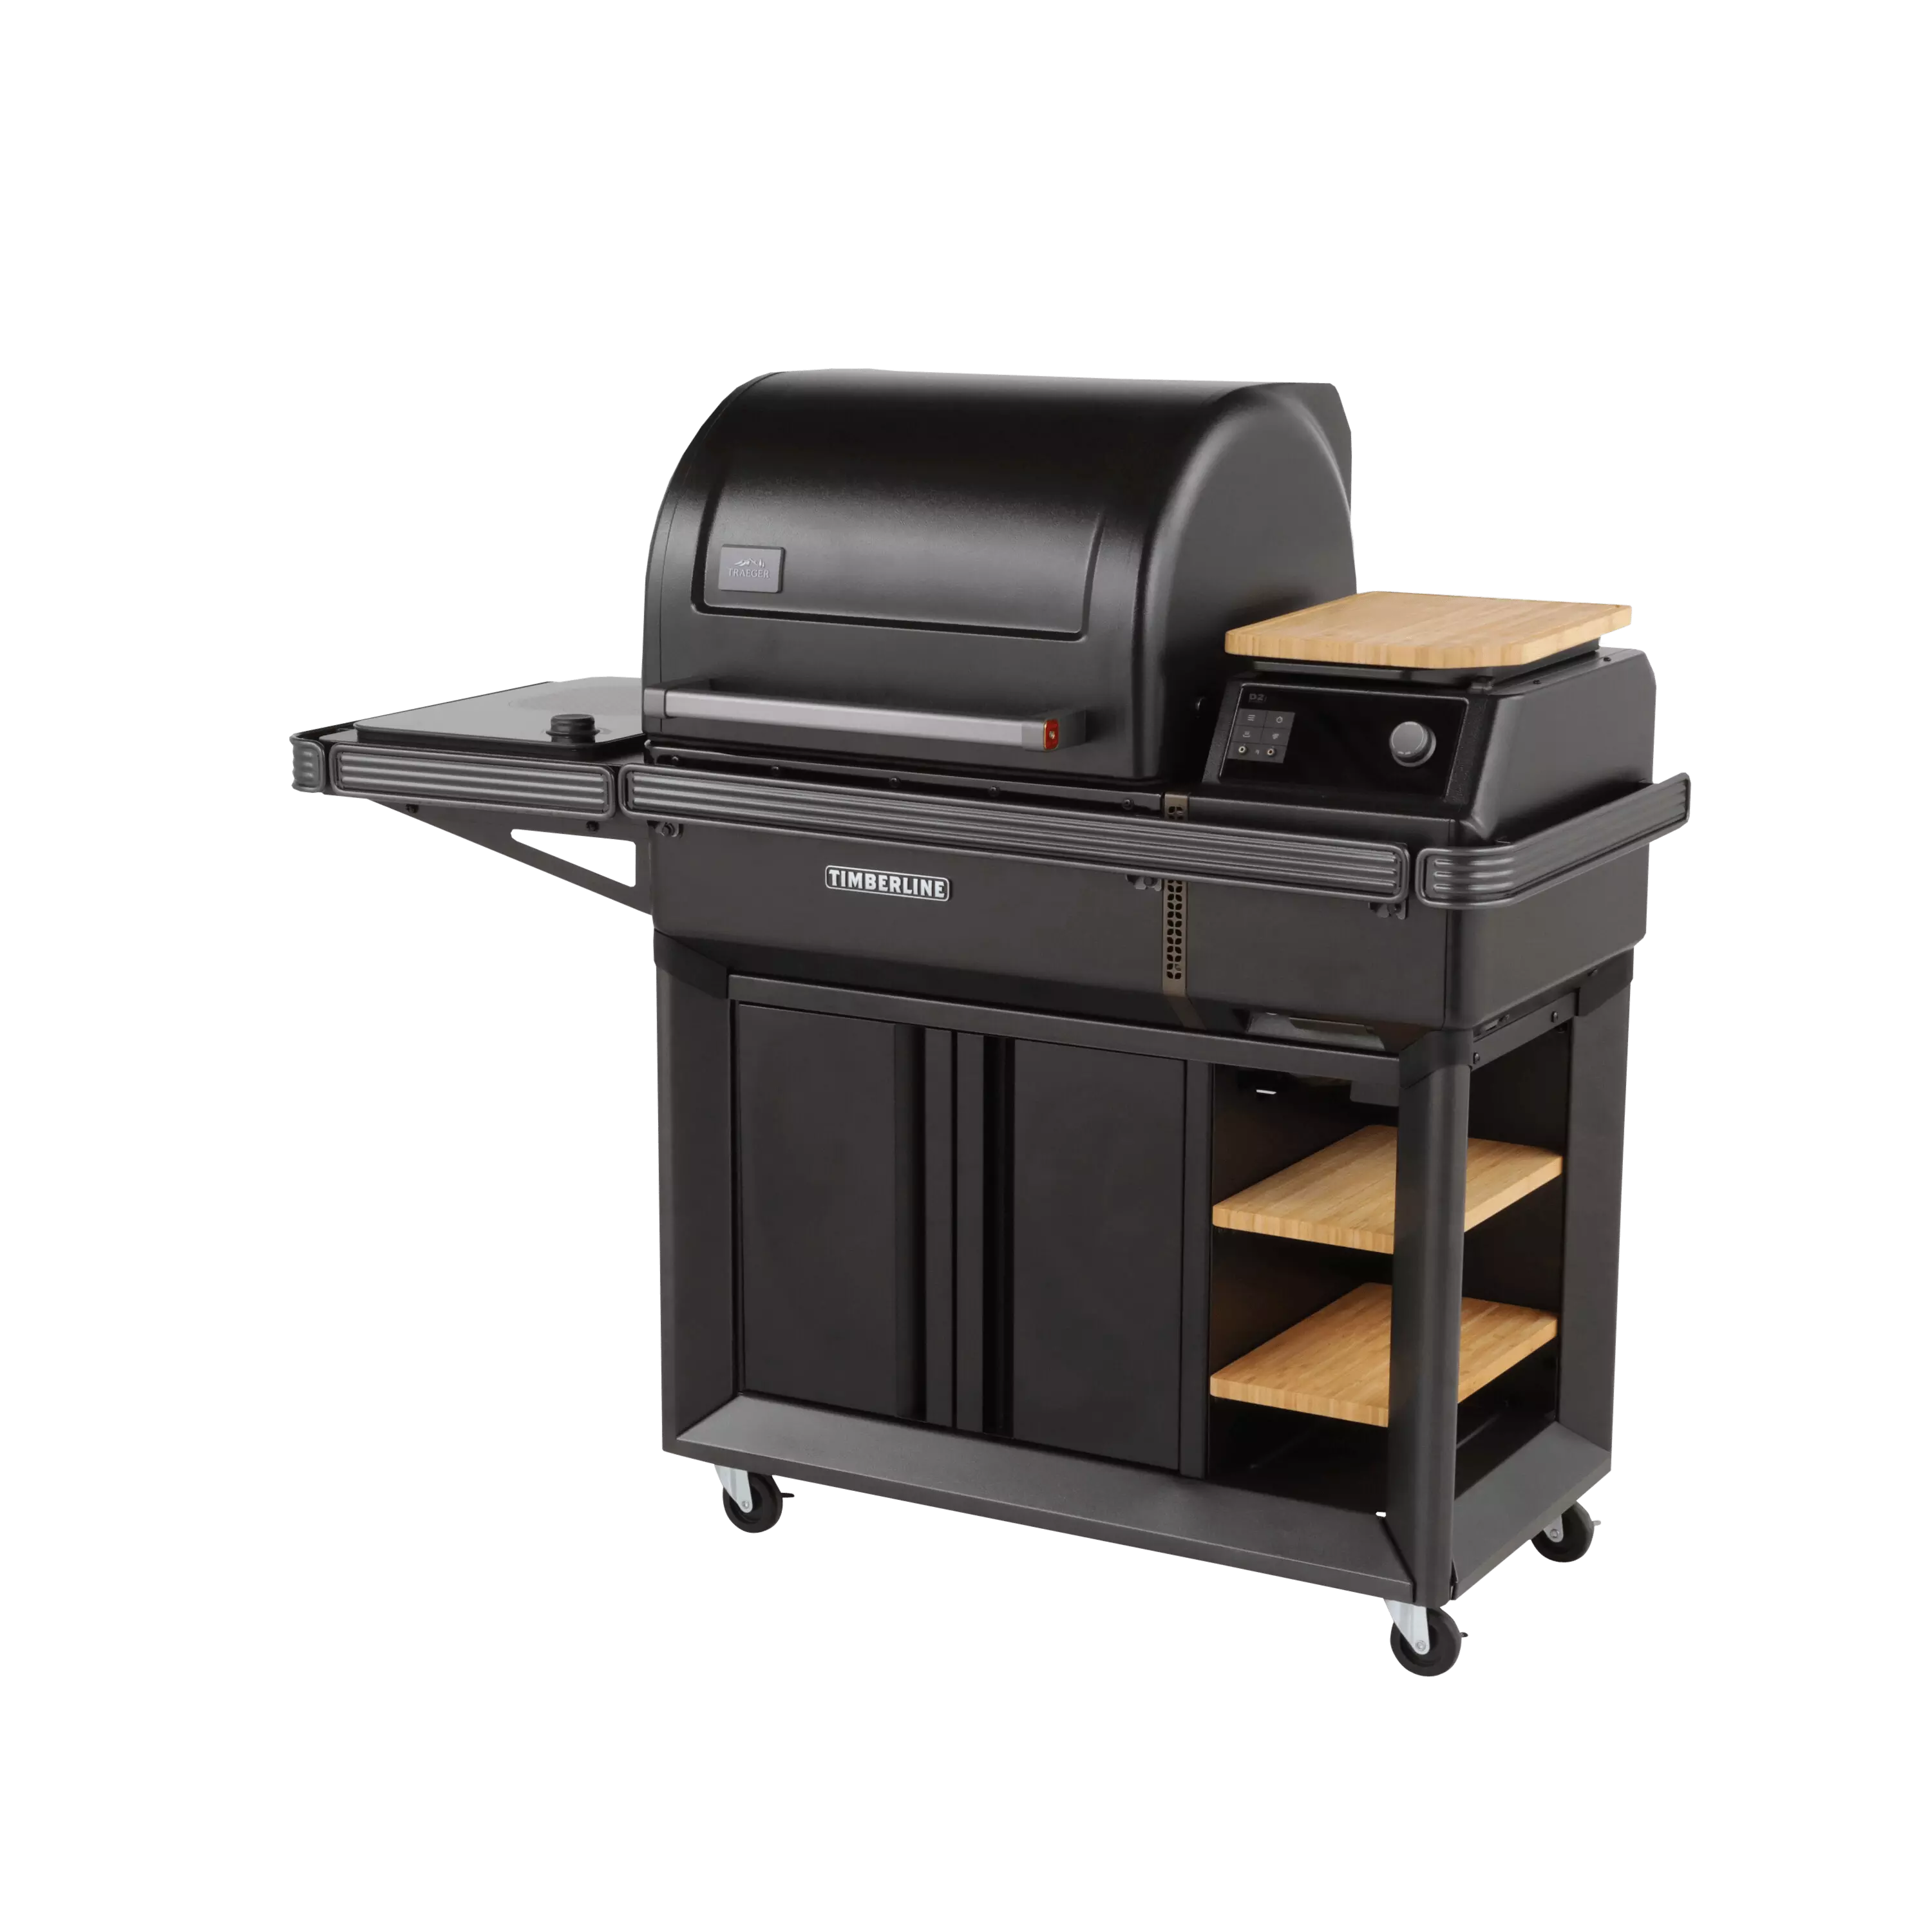 Traeger Wood-Fired Grills